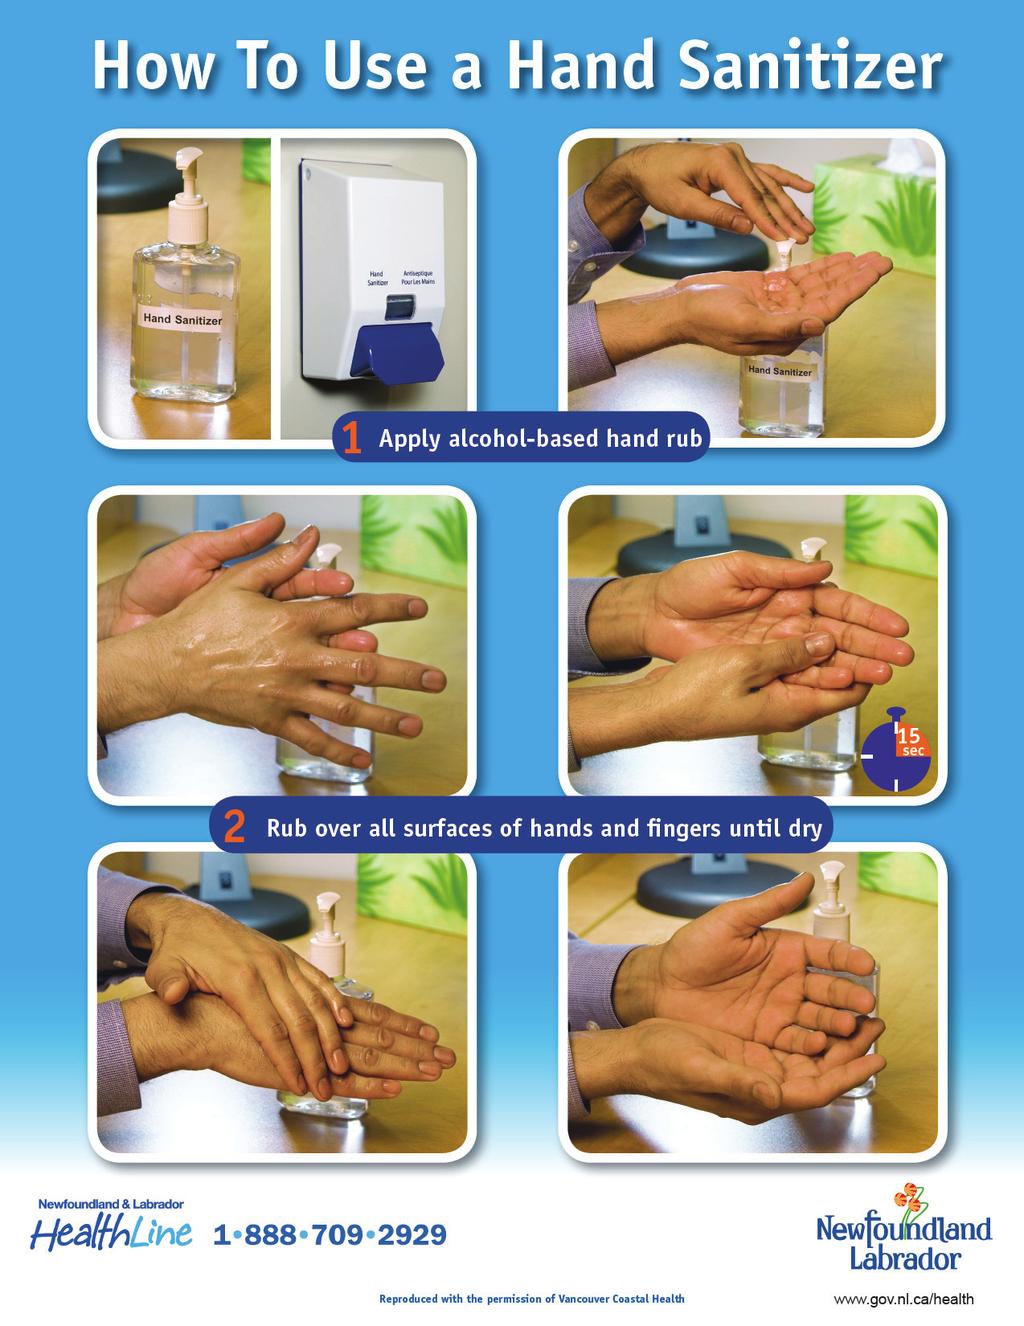 Clean, Cover and Contain Using Hand Sanitizers You can download this poster through the